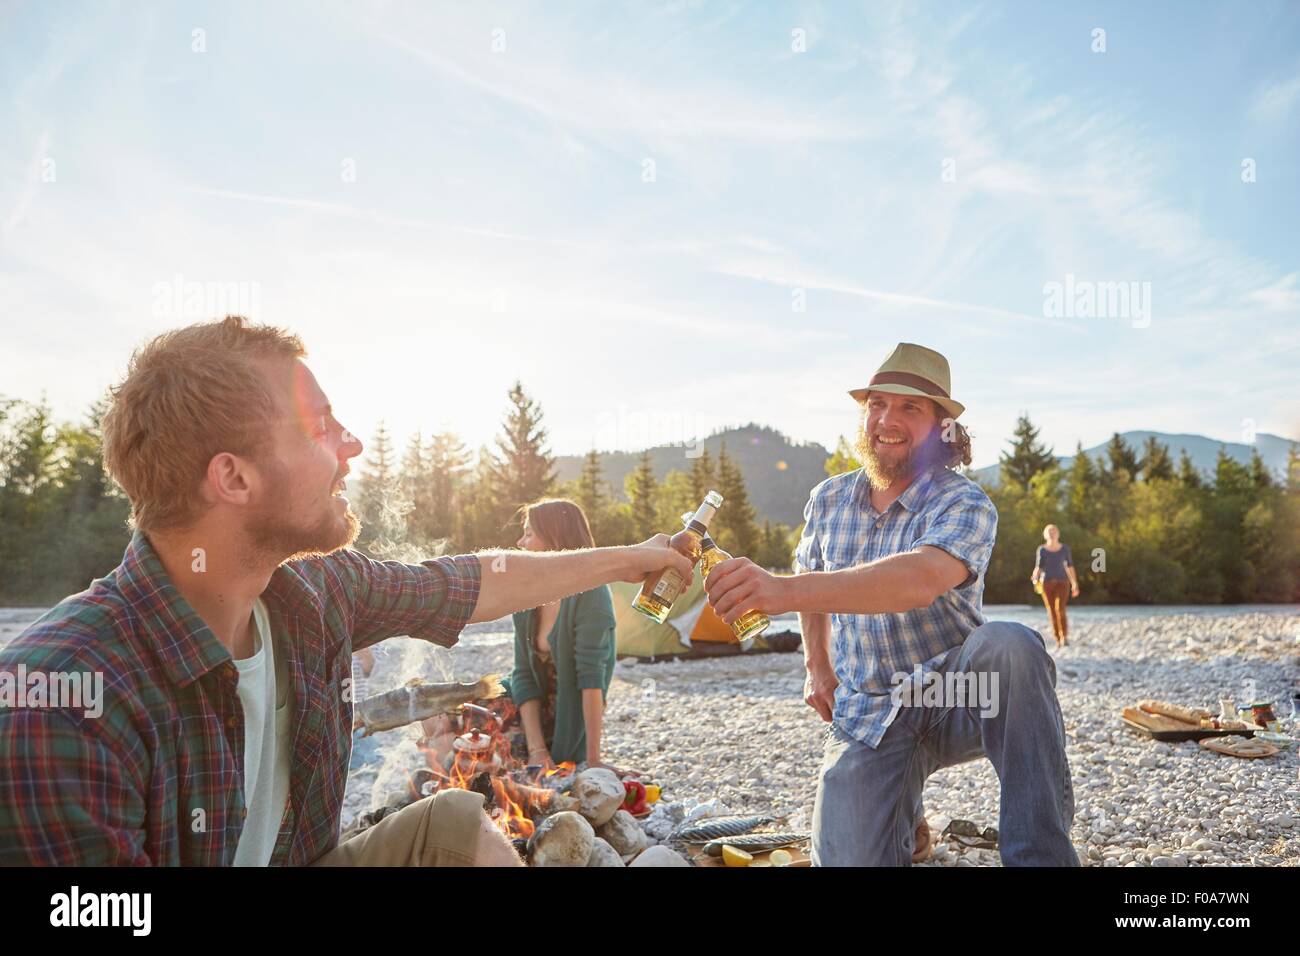 Adult men sitting around campfire making a toast with beer bottles Stock Photo